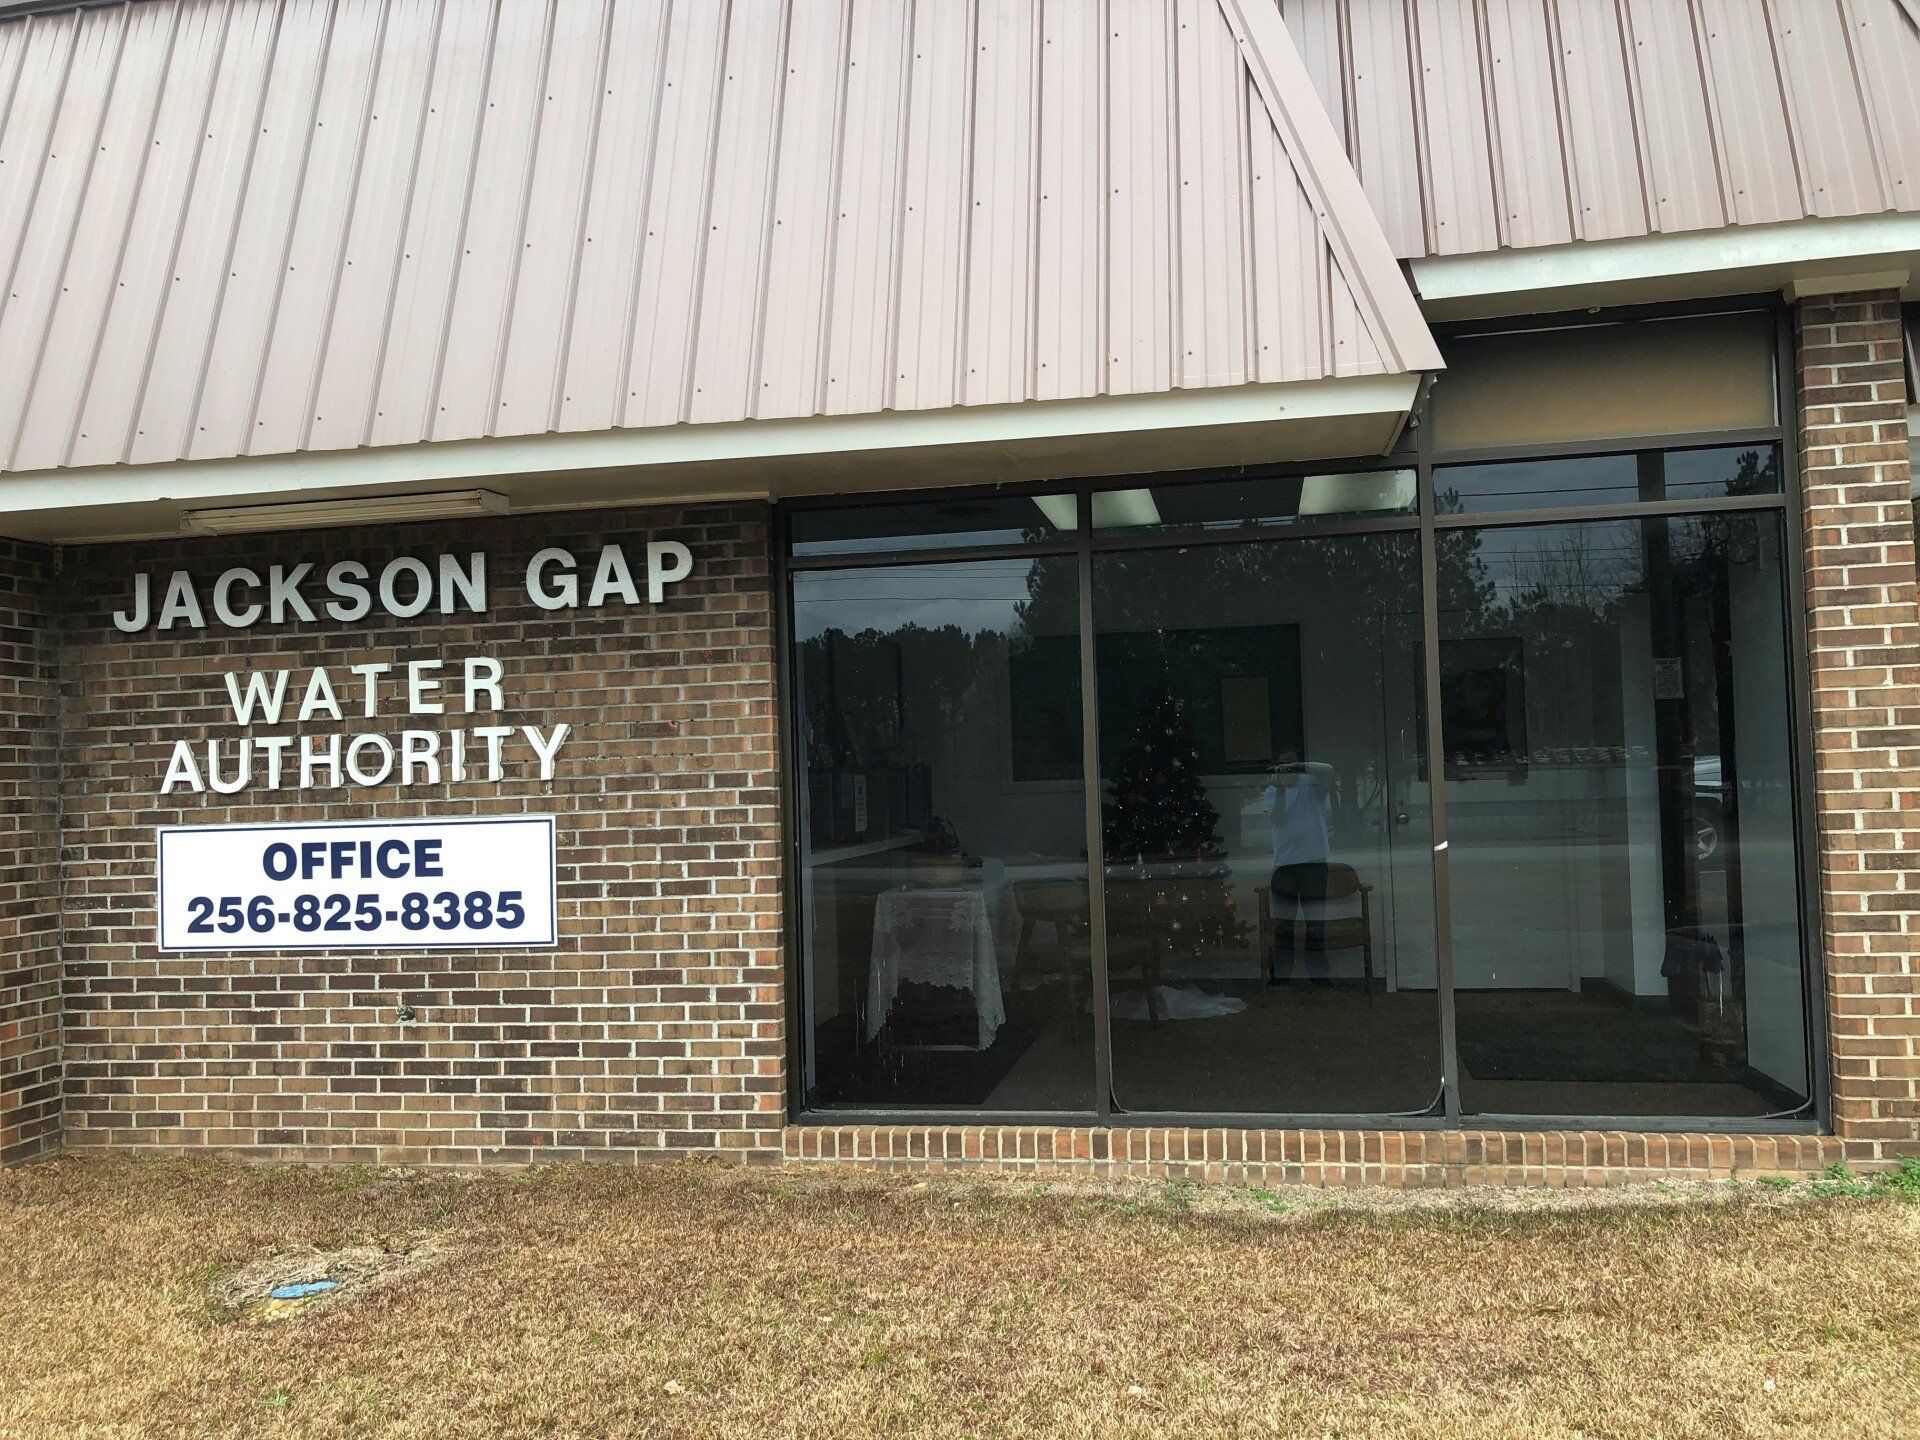 business window tinting at Lake Martin in Jacksons Gap - Now OVER 90% Heat & Glare has been eliminated after SPF Performance Tint installed to the office windows and door.